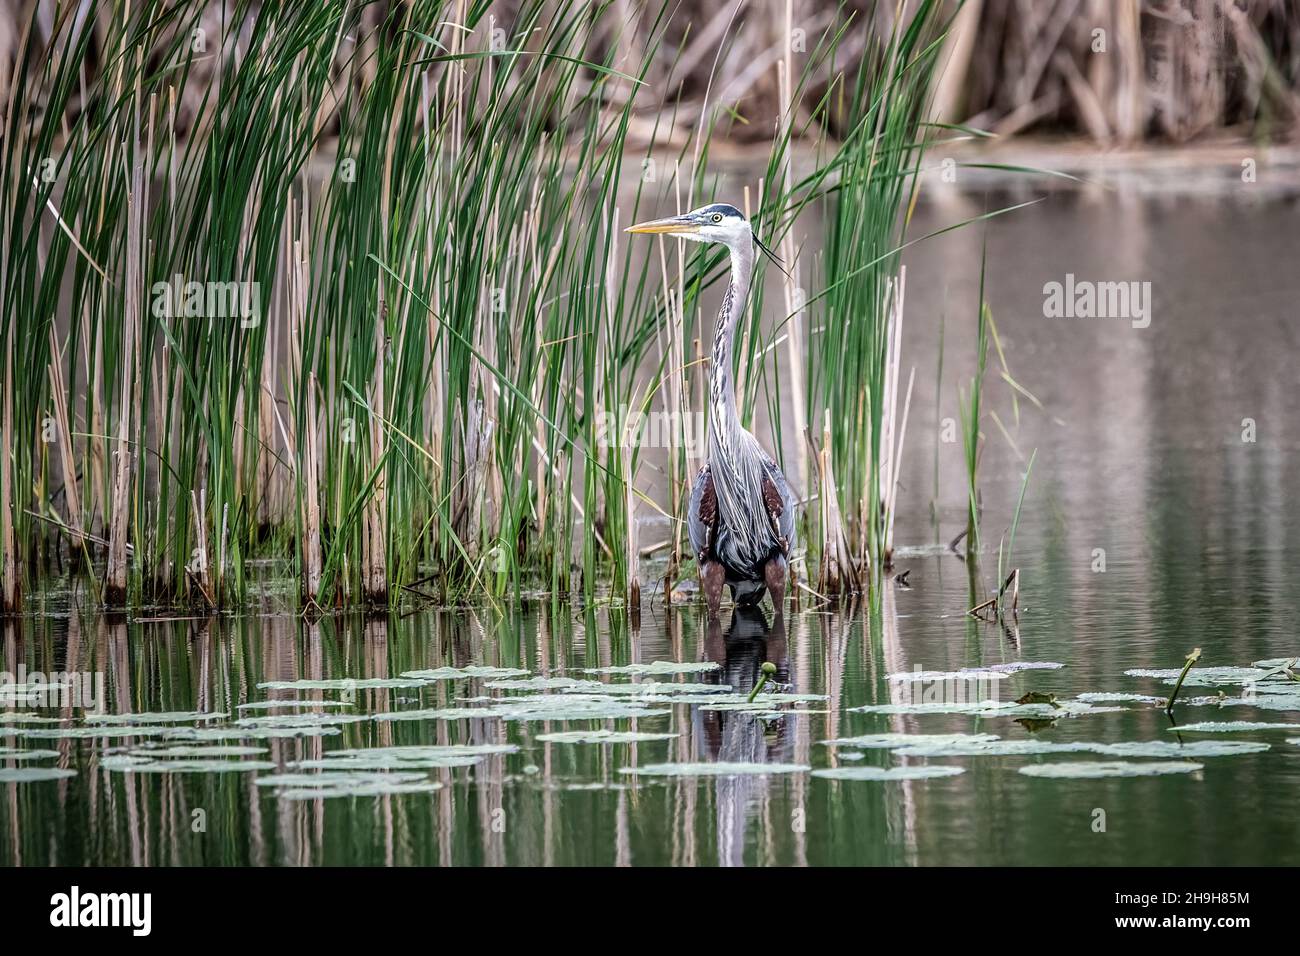 Great blue heron among the reed grass and lily pads in a small wetland pond in the springtime. Stock Photo